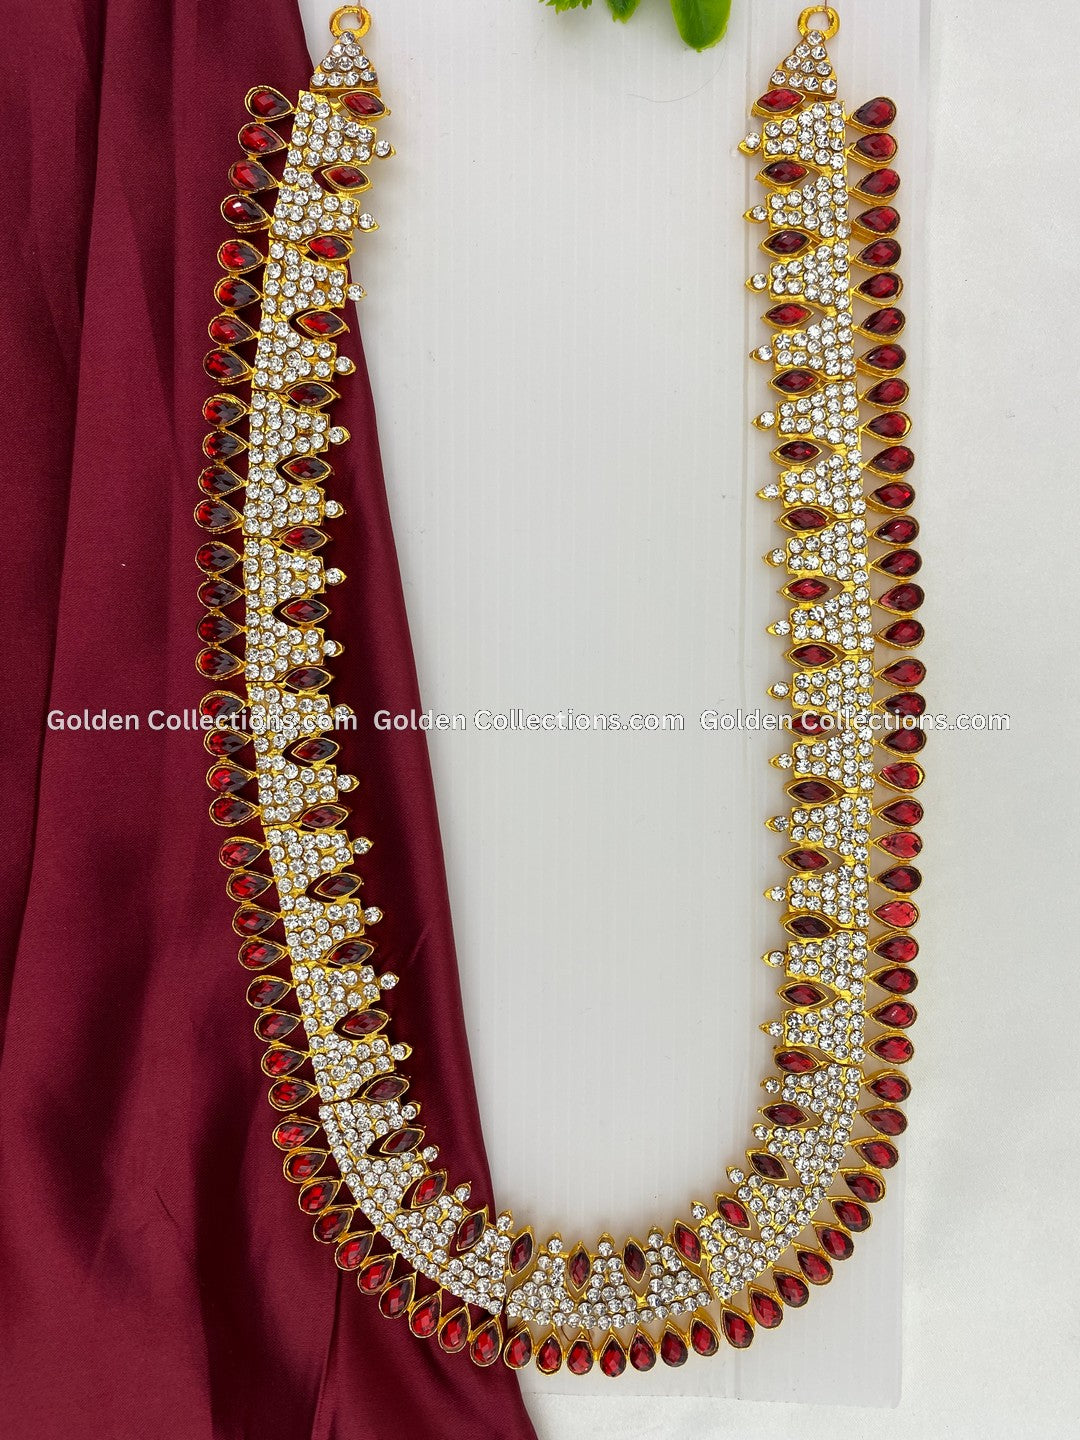 Glamorous Jewellery for Goddess Idol - GoldenCollections